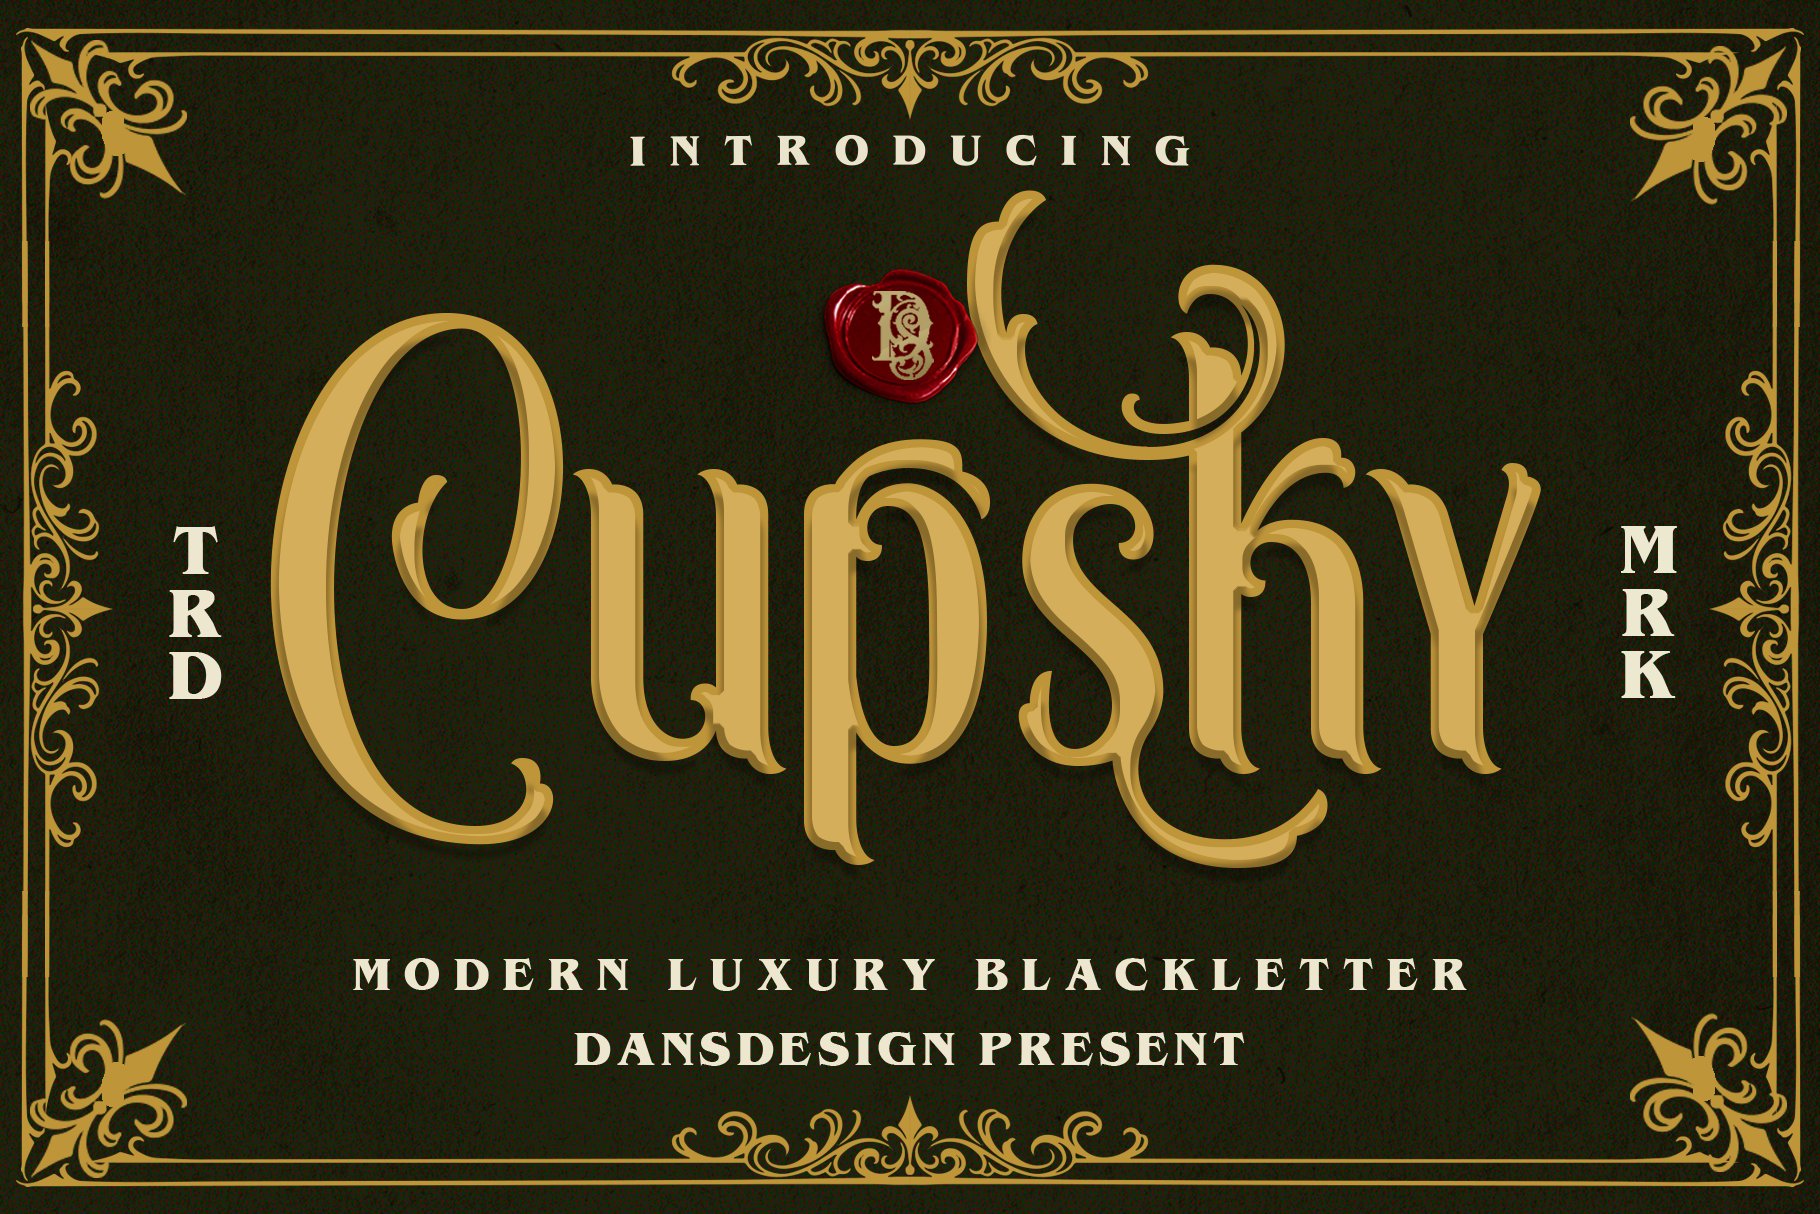 Cupsky cover image.